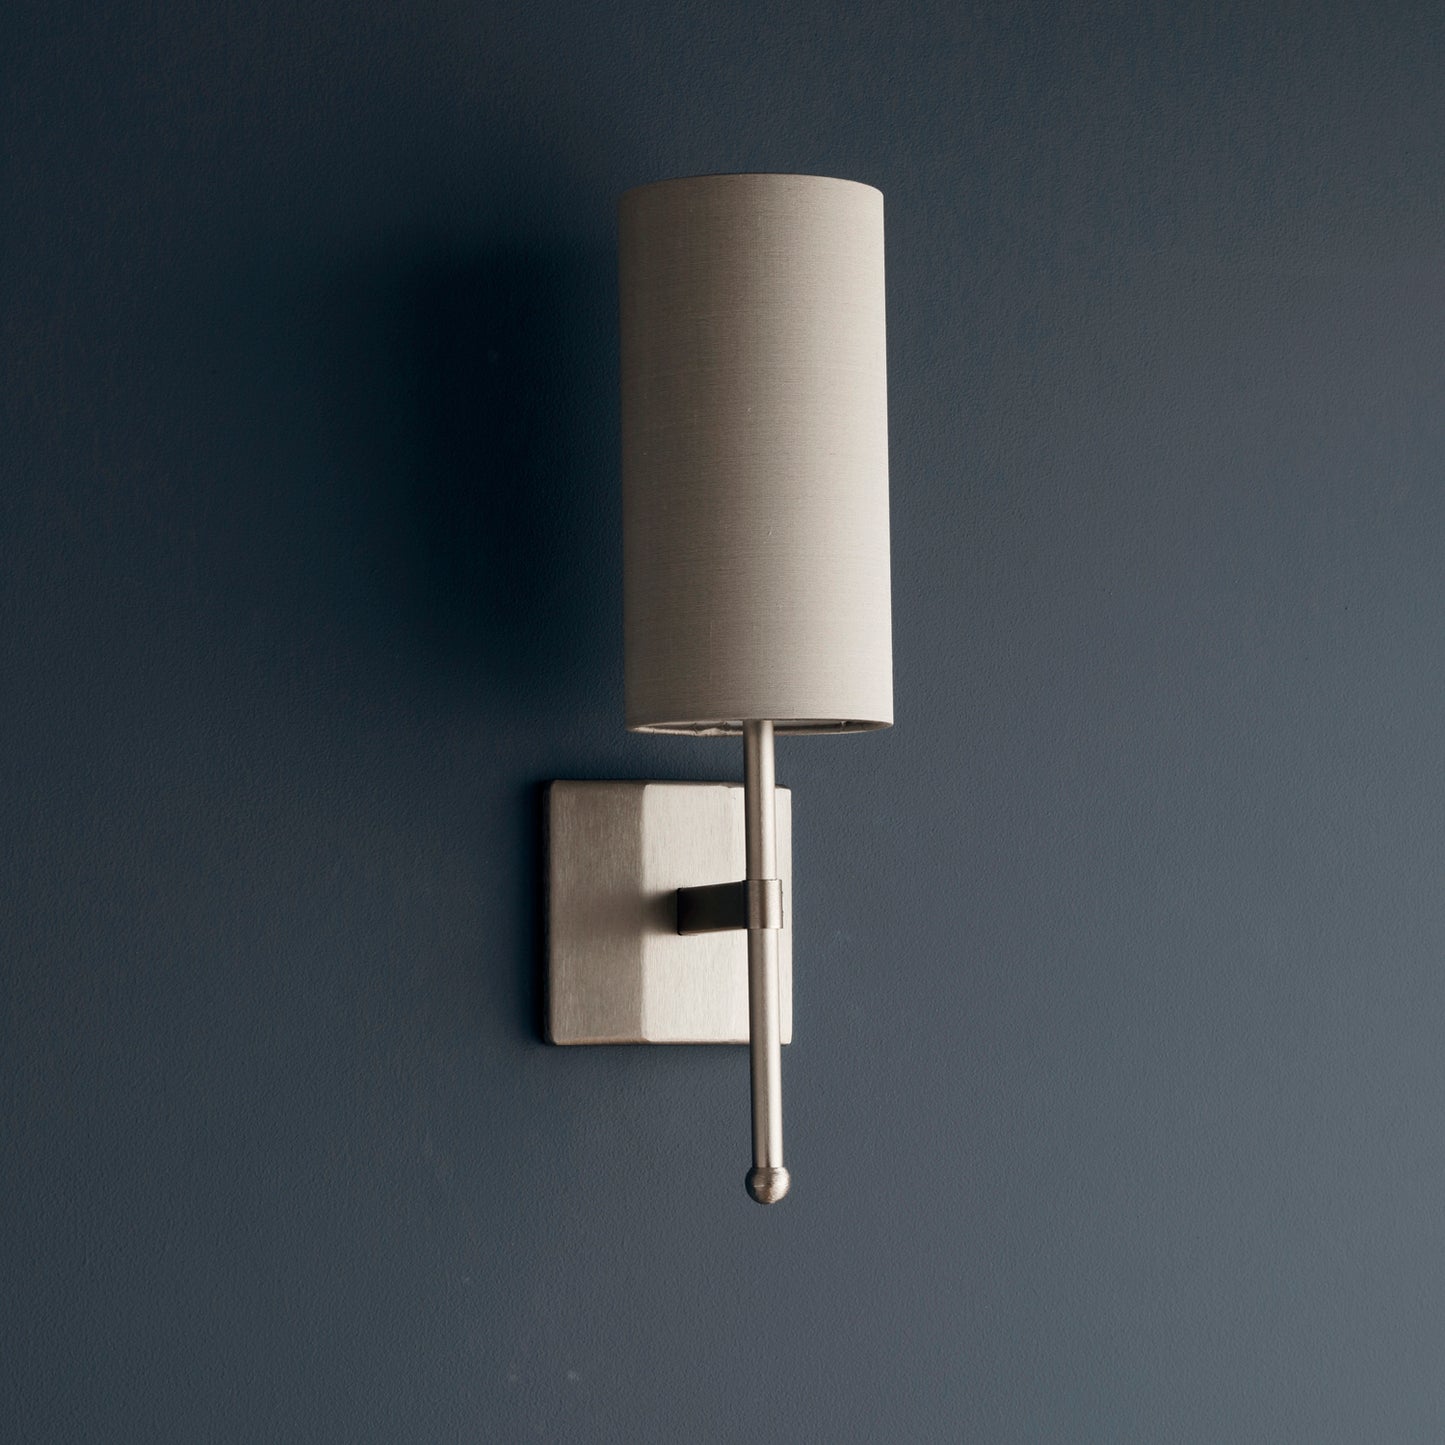 End-of-line Single Stem Wall Light in Flat Nickel with Birch Shades 240mm Depth - 224, 225, 226